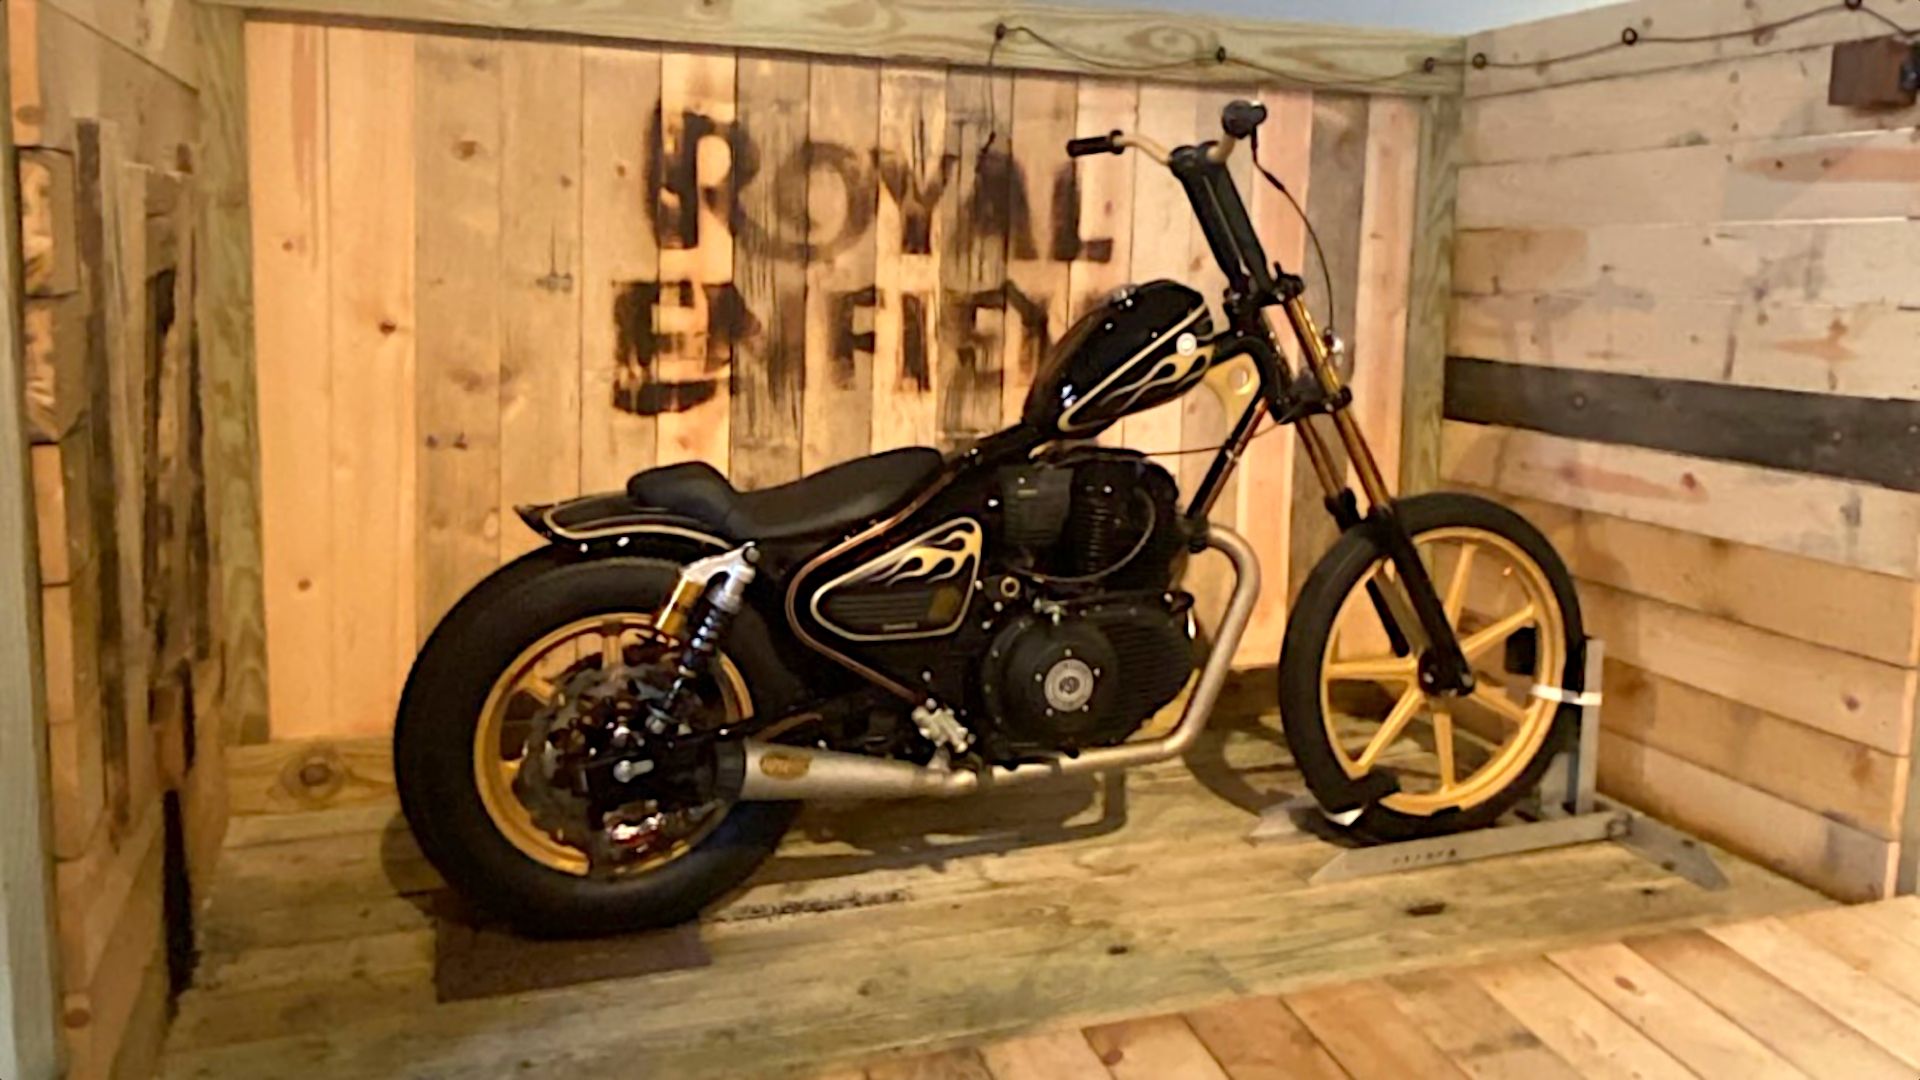 Royal Enfield Super Meteor 650 Customized By Roland Sands Is A Menacing